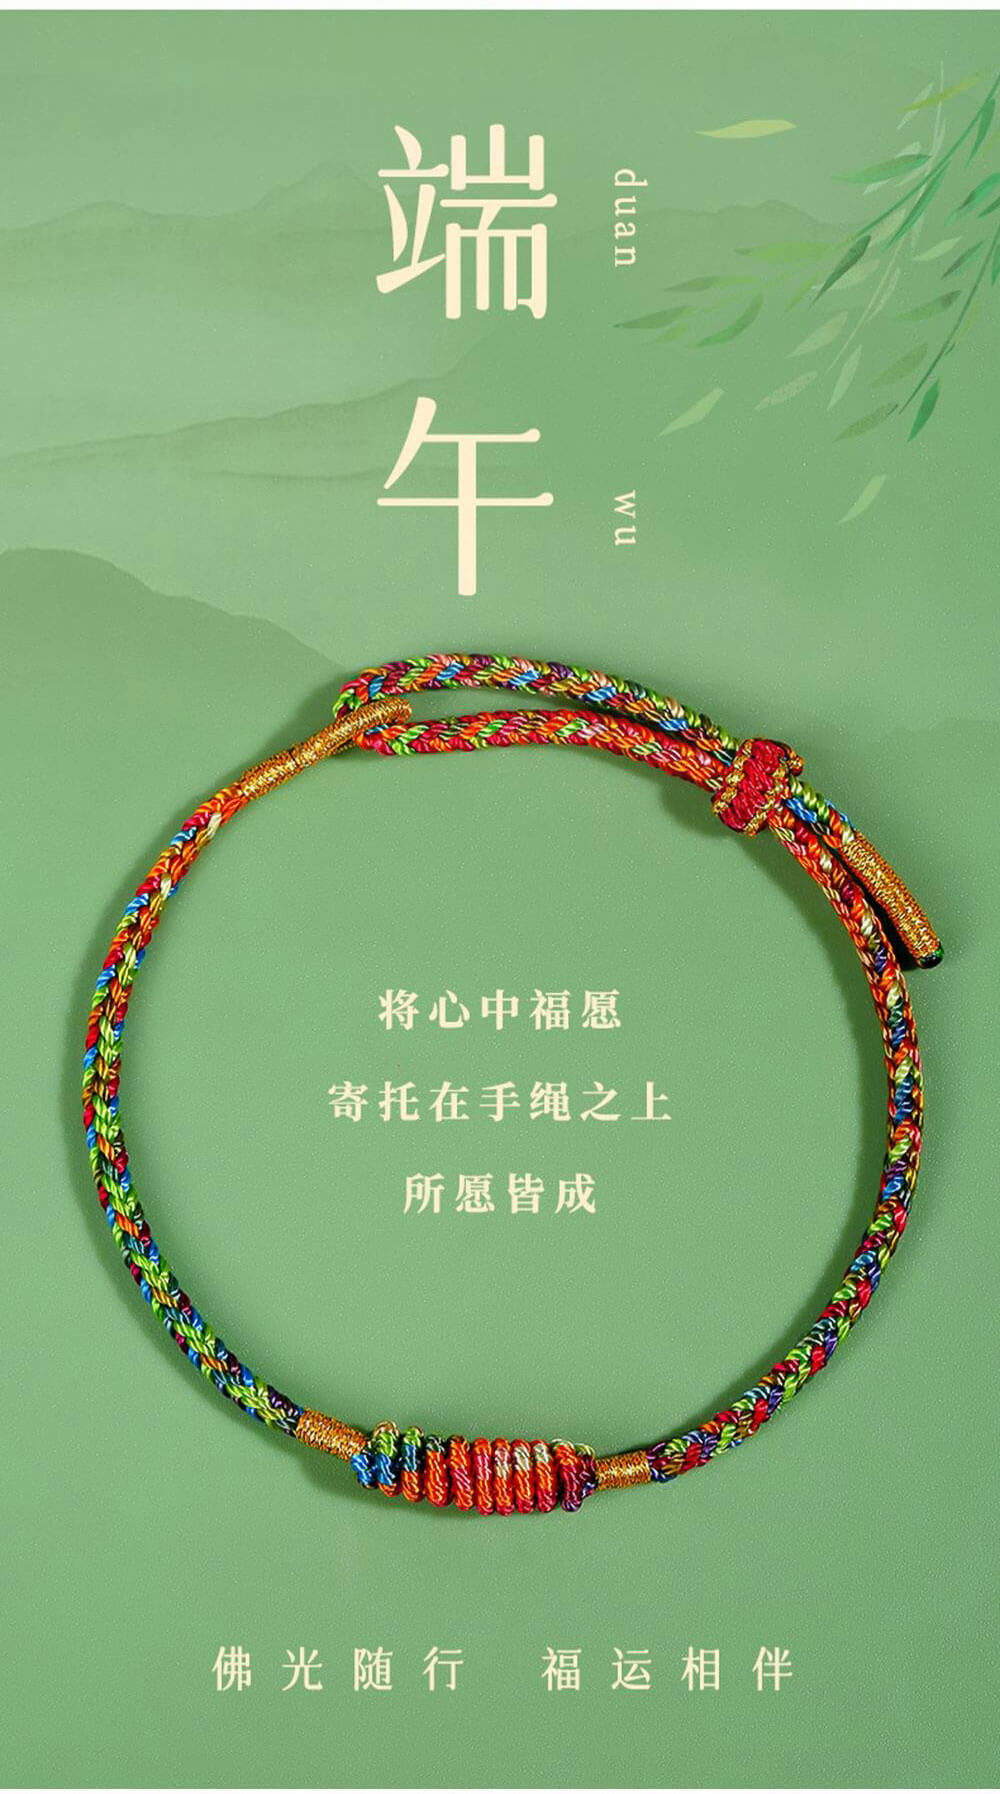 《Dragon Boat Festival Rainbow Rope》 Traditional Handwoven Multicolored Rope for Dragon Boat Festival